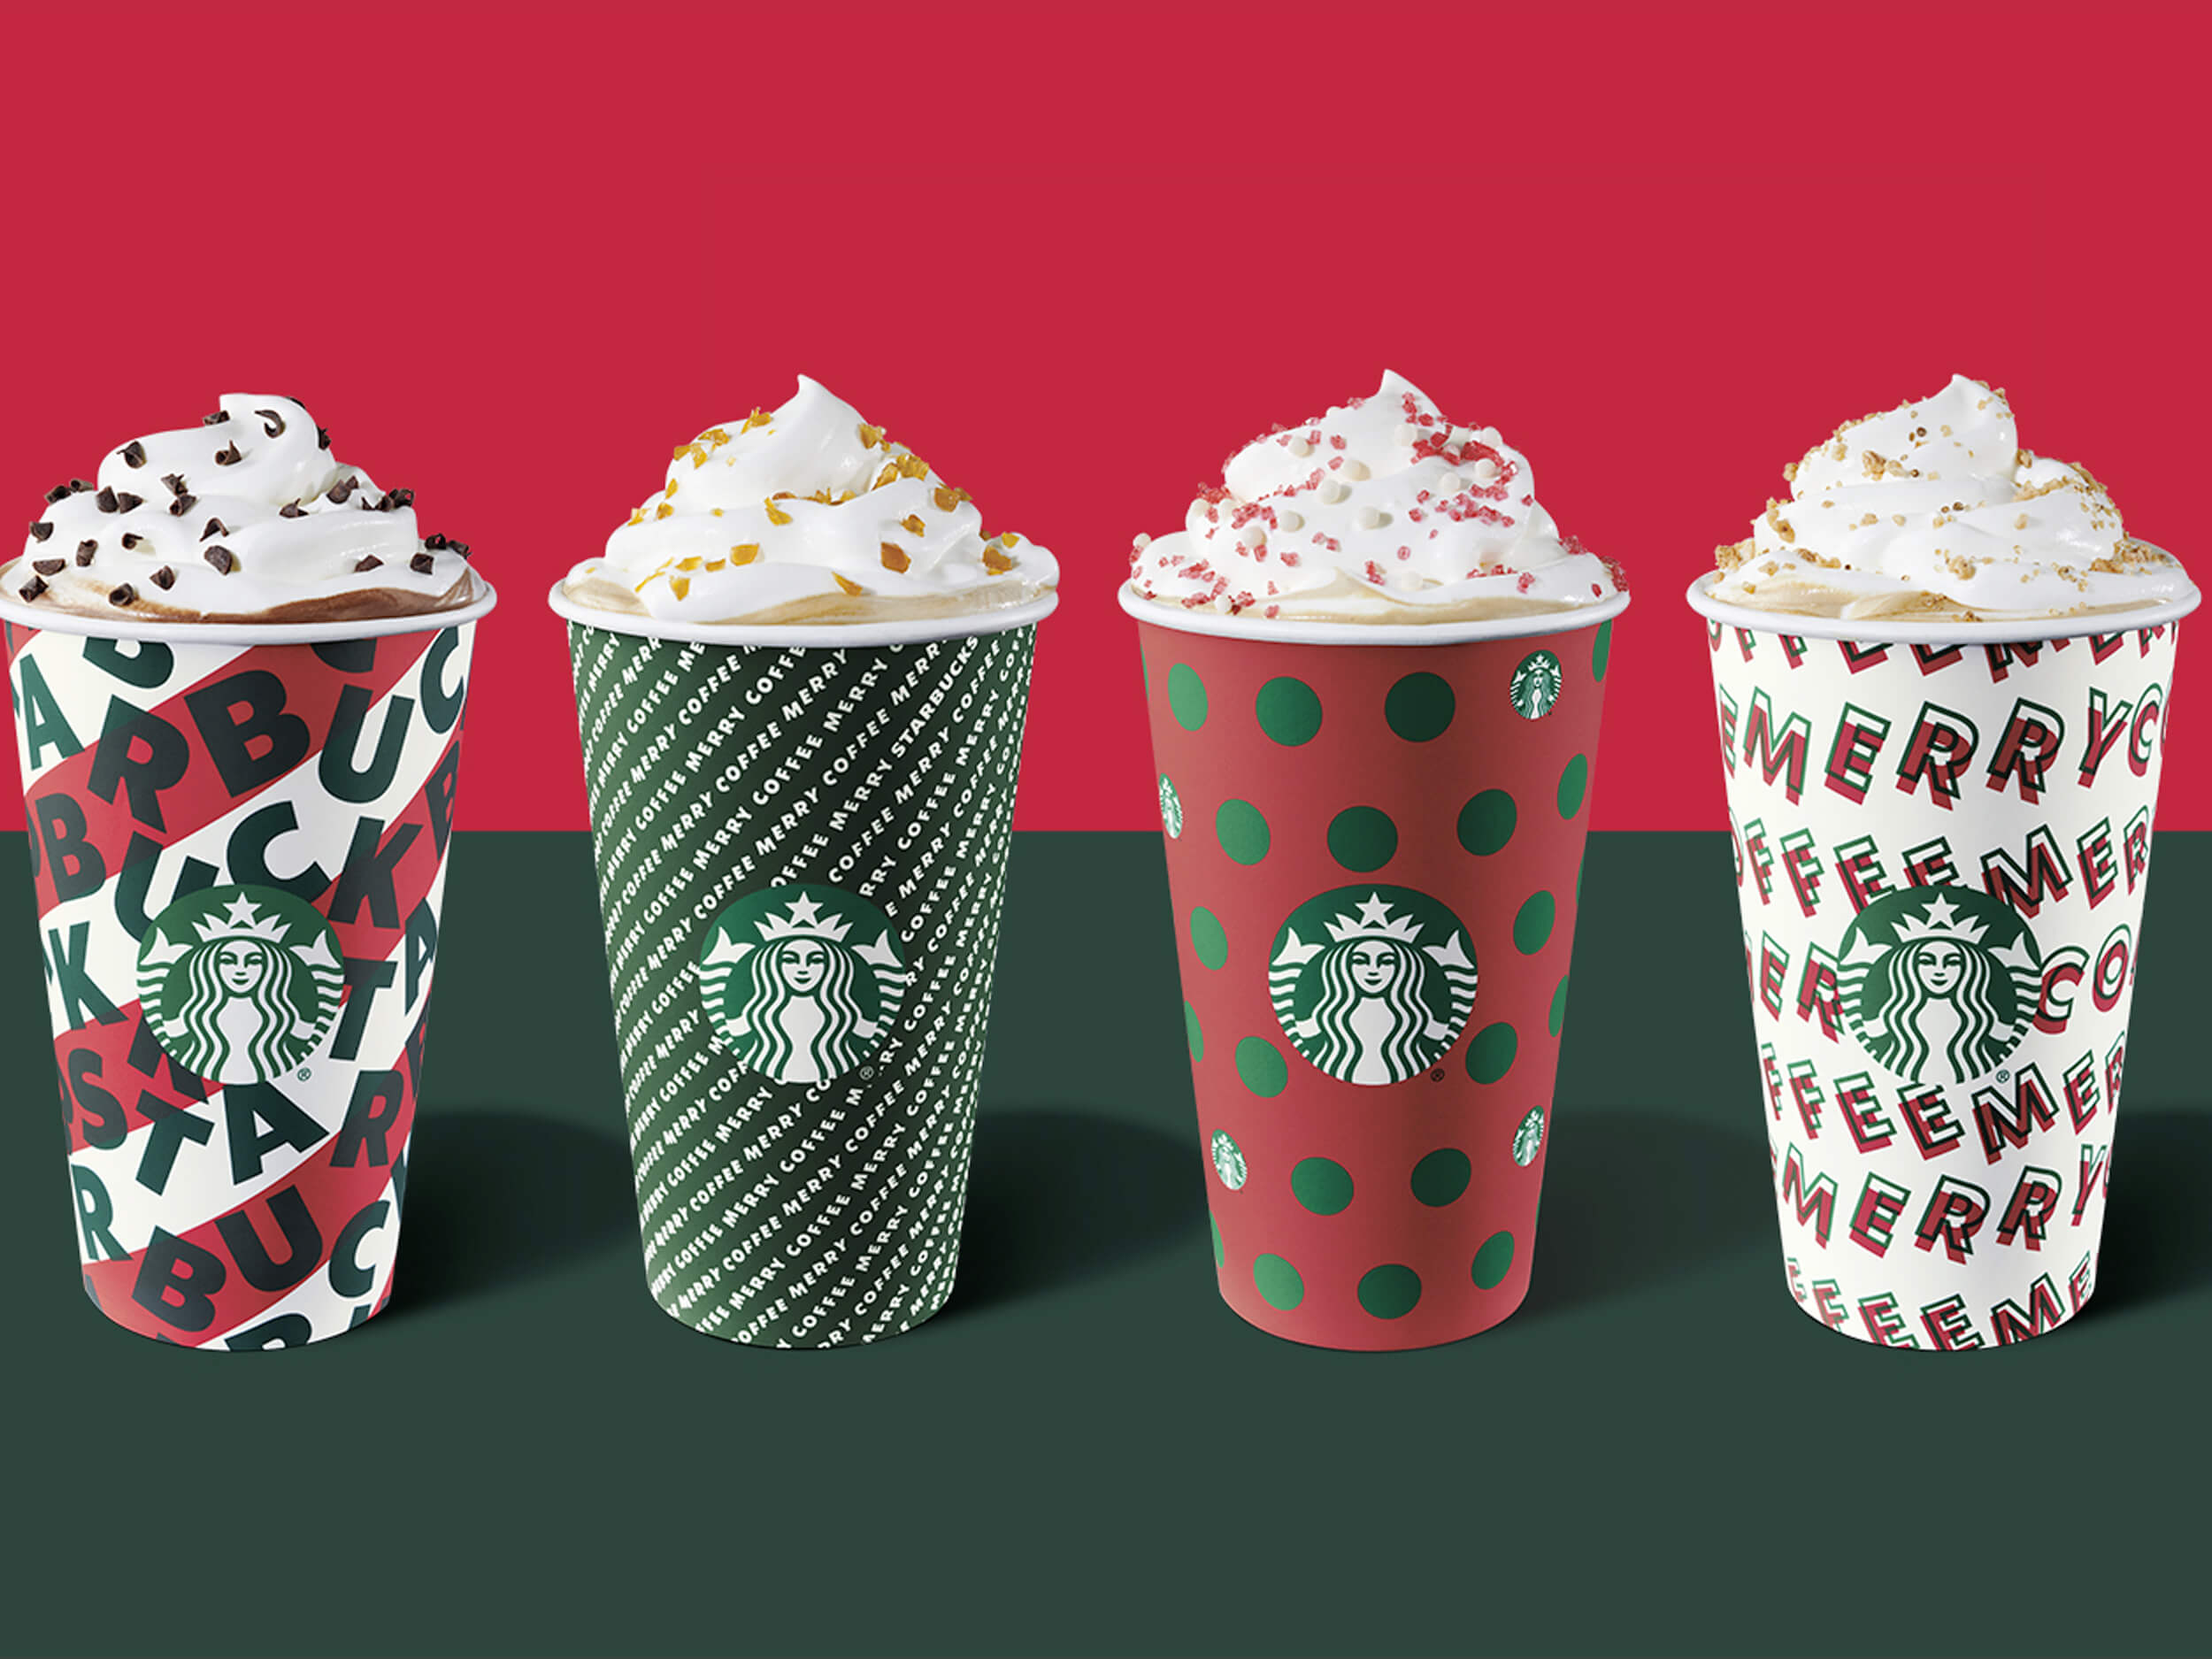 What Starbucks Christmas Holiday Drinks Are Available This Year?